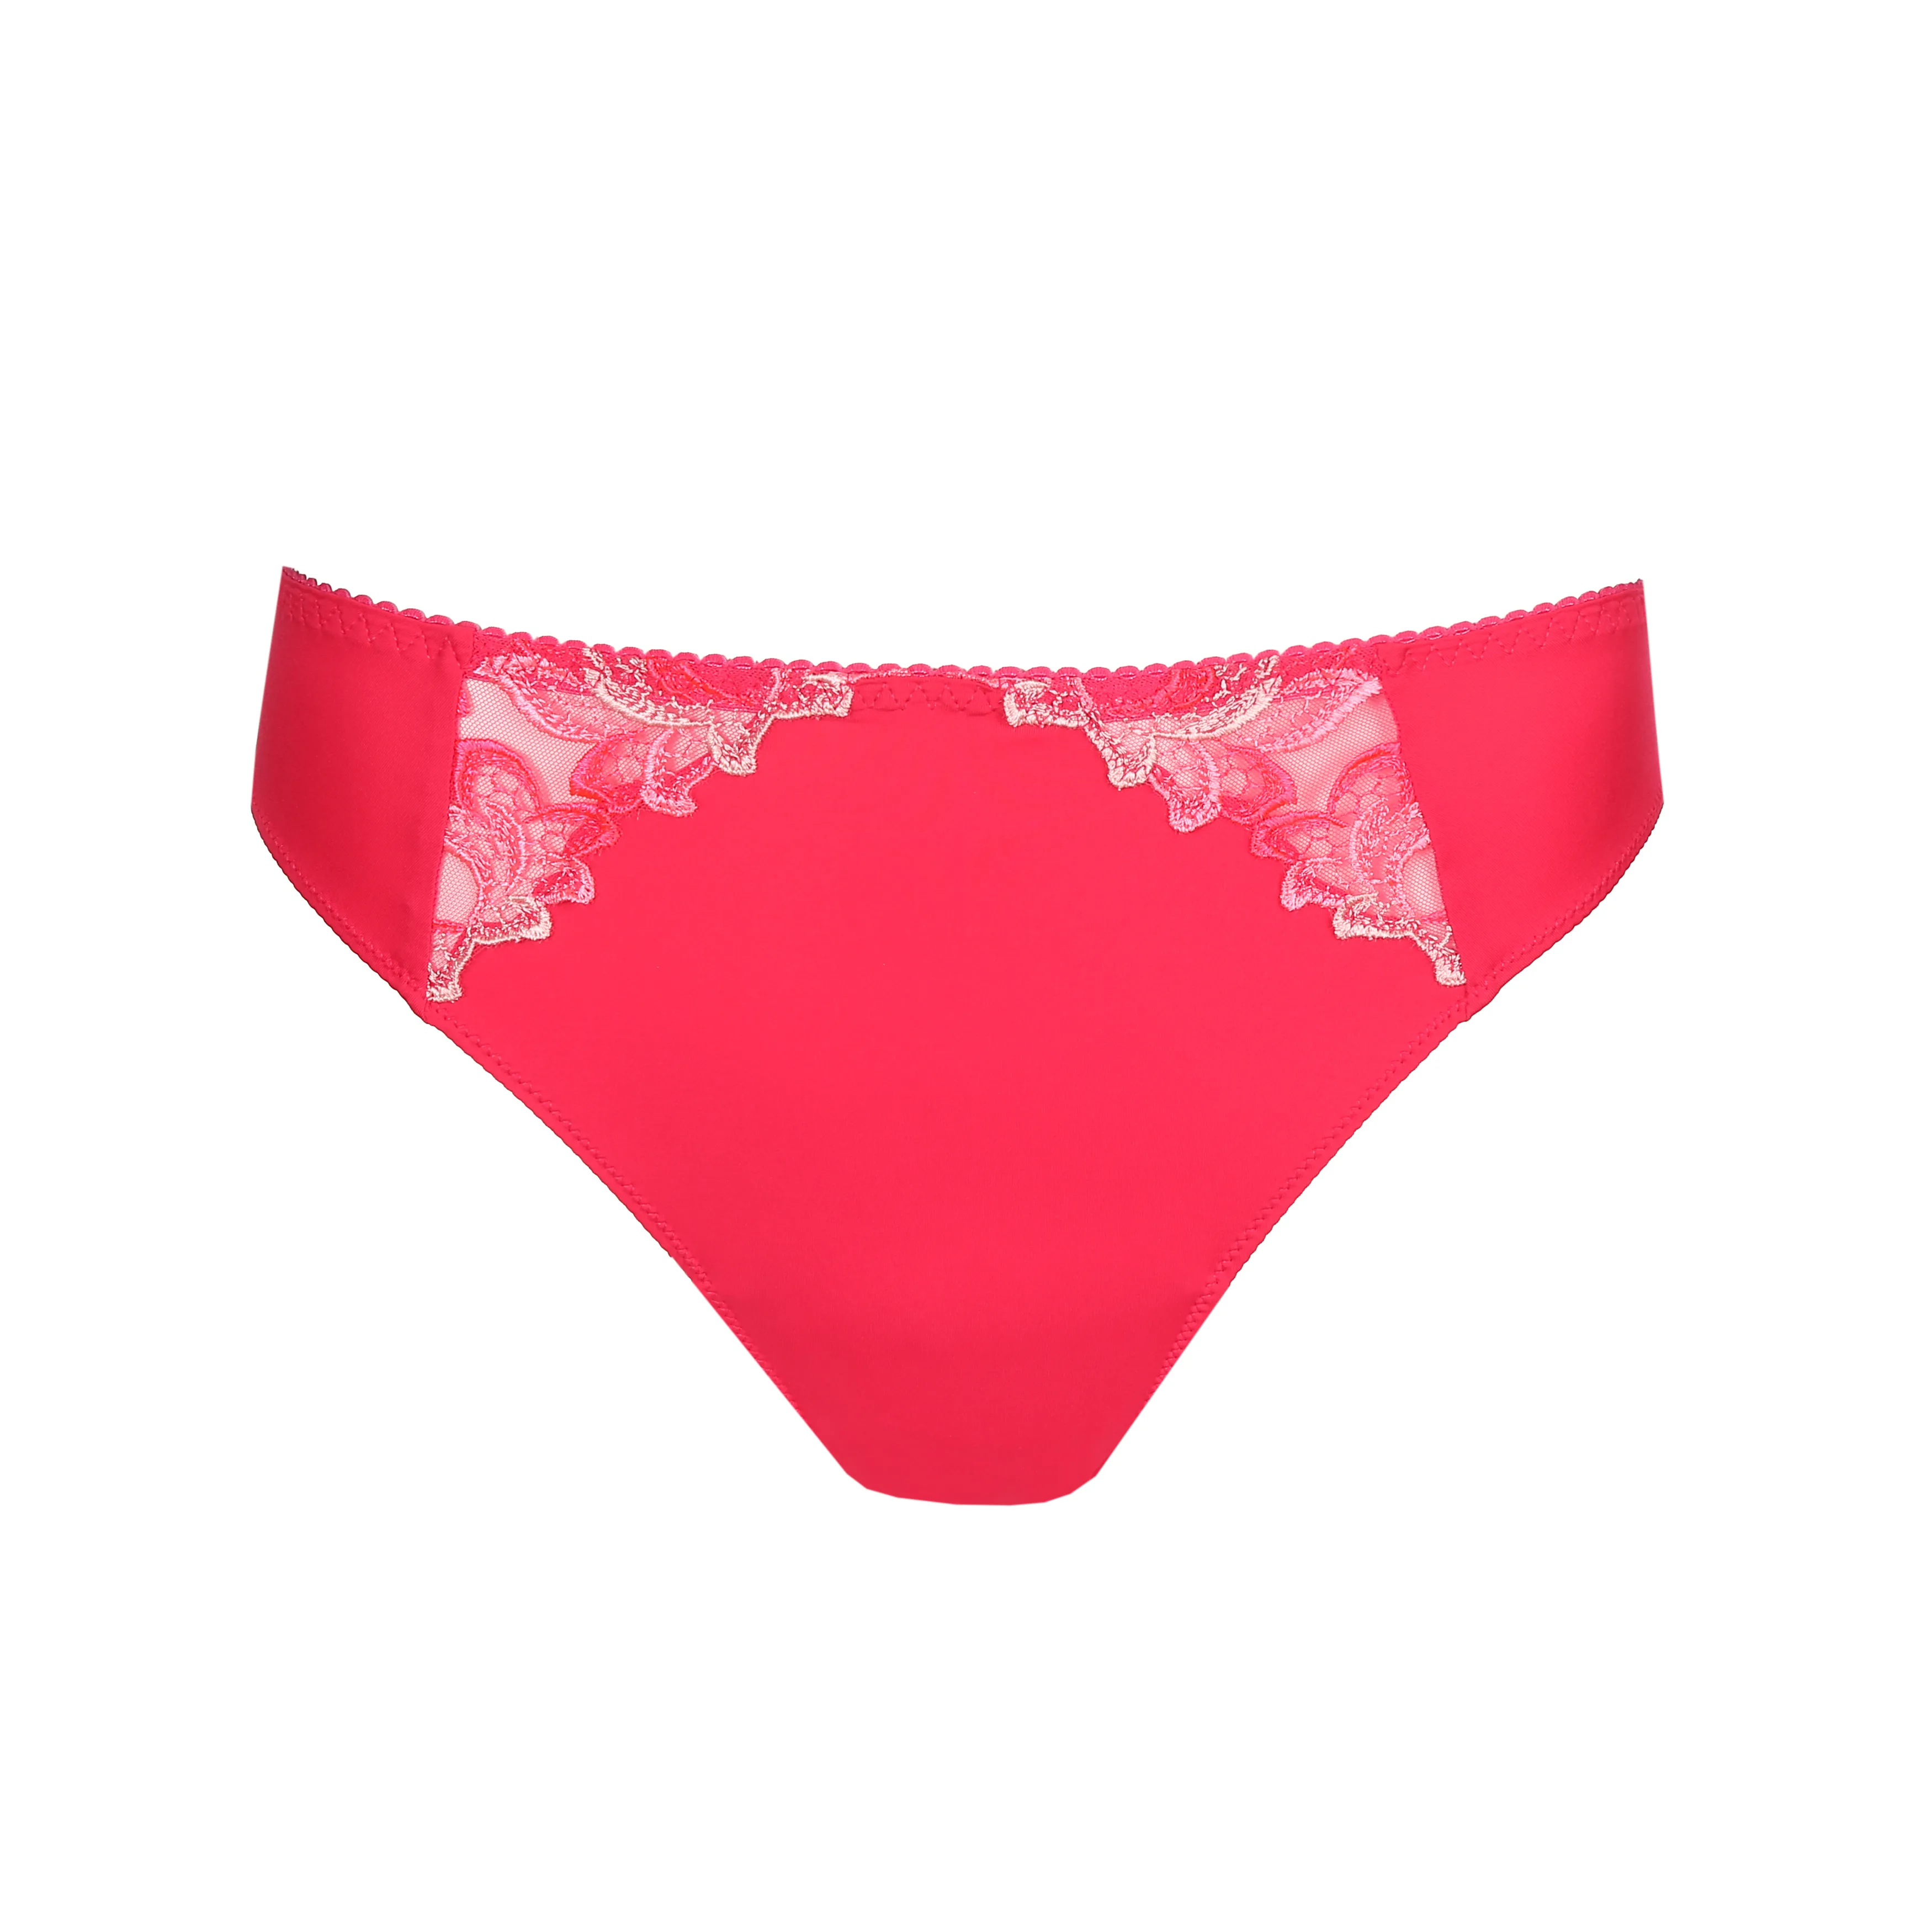 PrimaDonna DEAUVILLE Amour thong